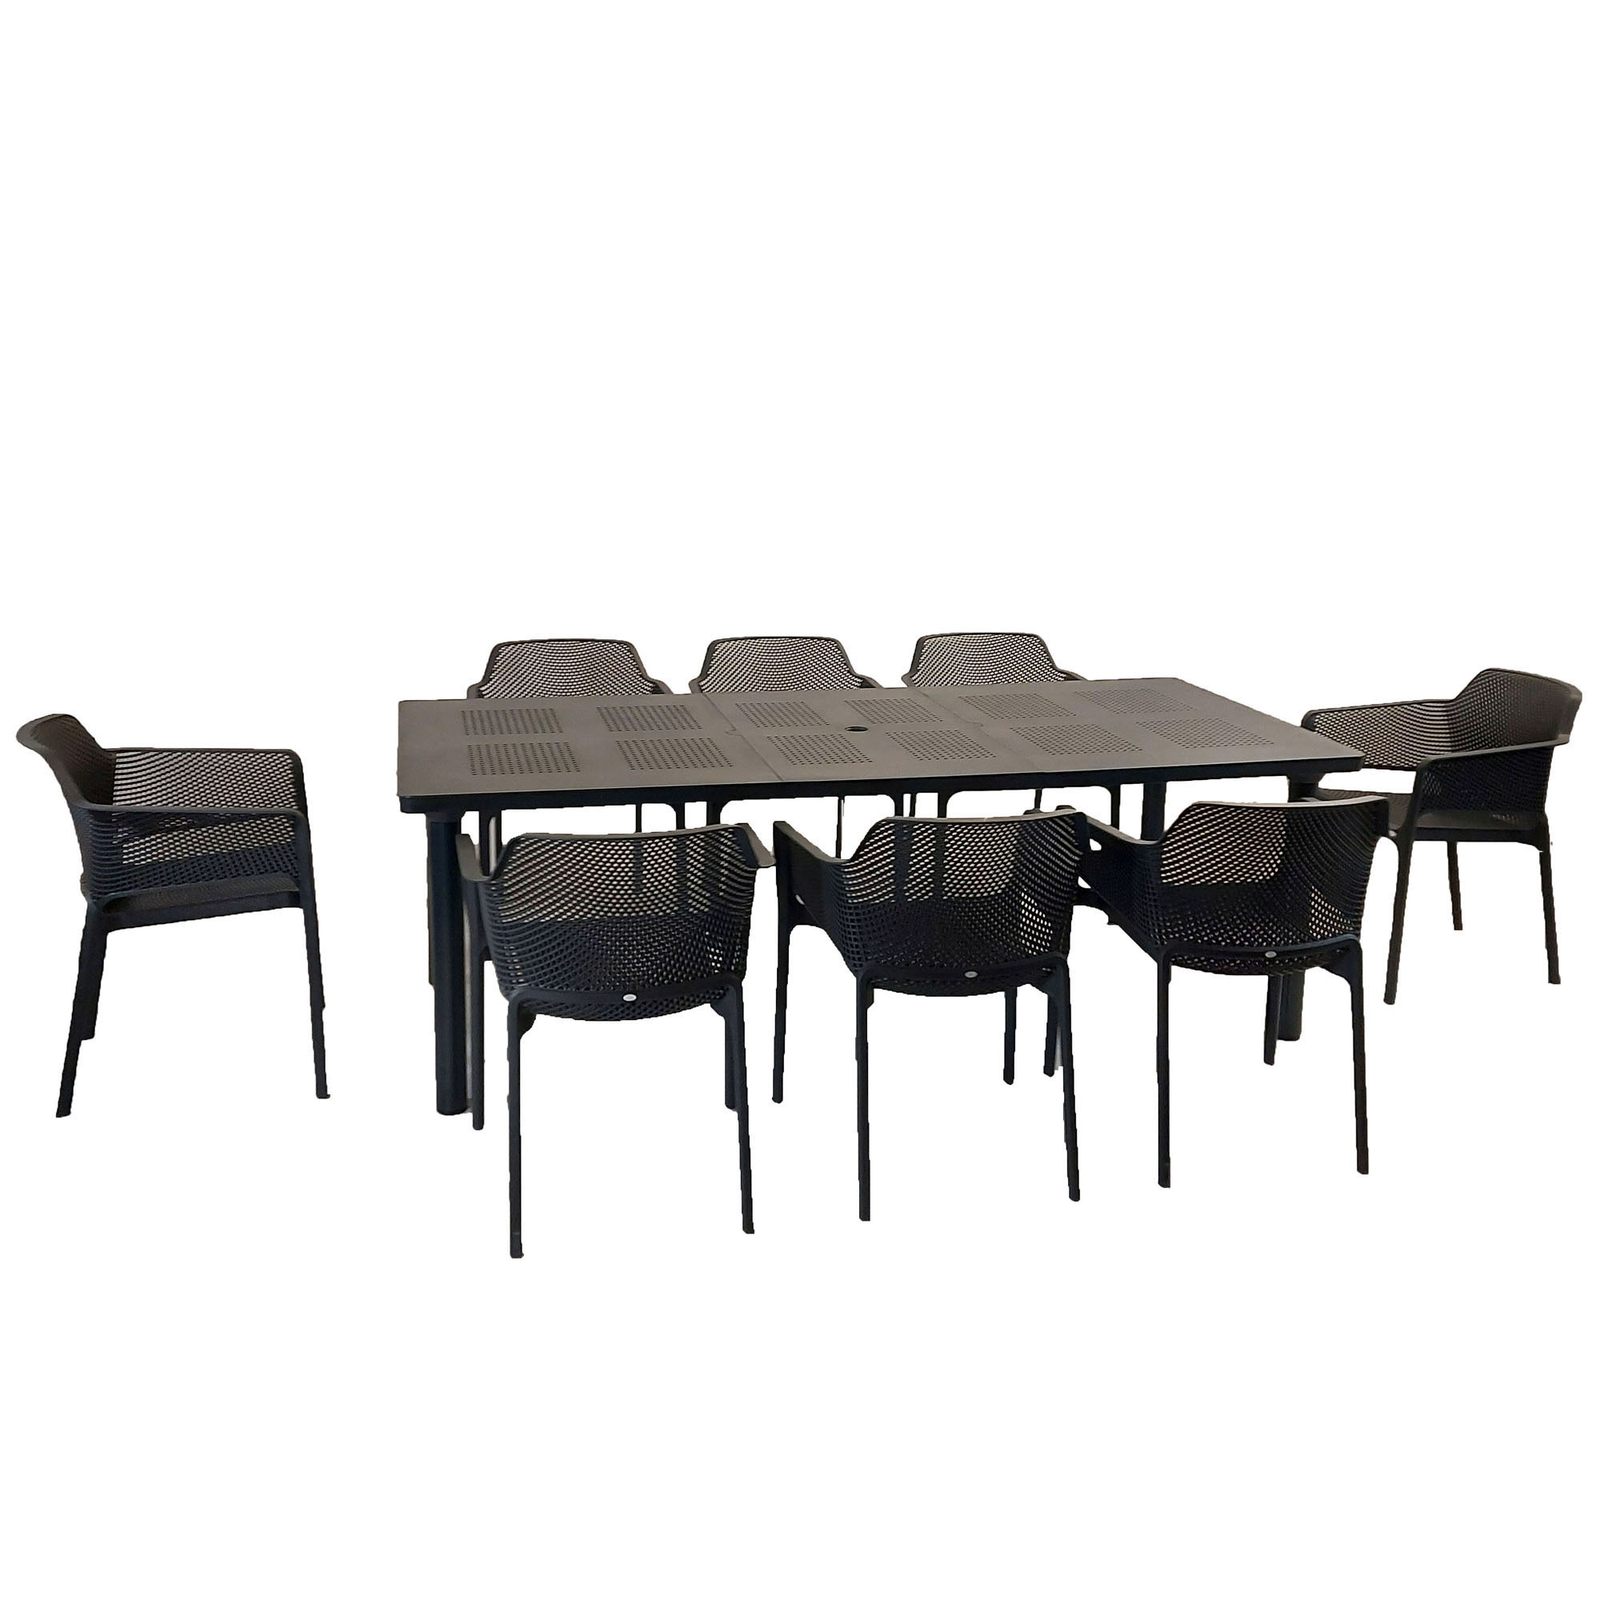 Nardi Libeccio Extending  Dining Table with 8 Net Chairs in Anthracite Garden Dining Set Dining Sets Nardi   